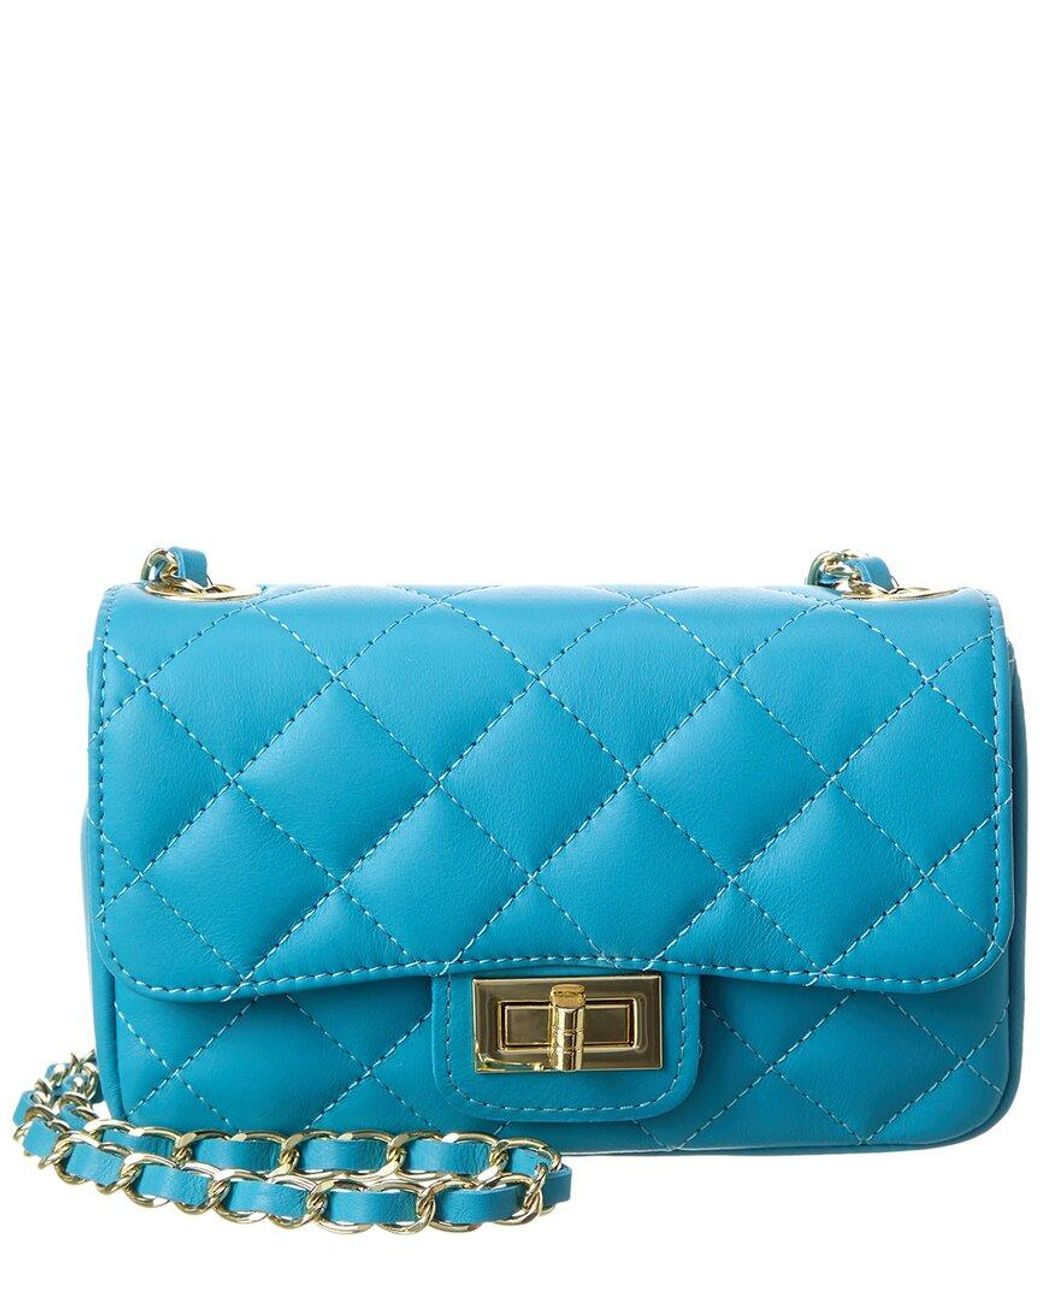 Persaman New York Gia Quilted Leather Shoulder Bag in Blue | Lyst